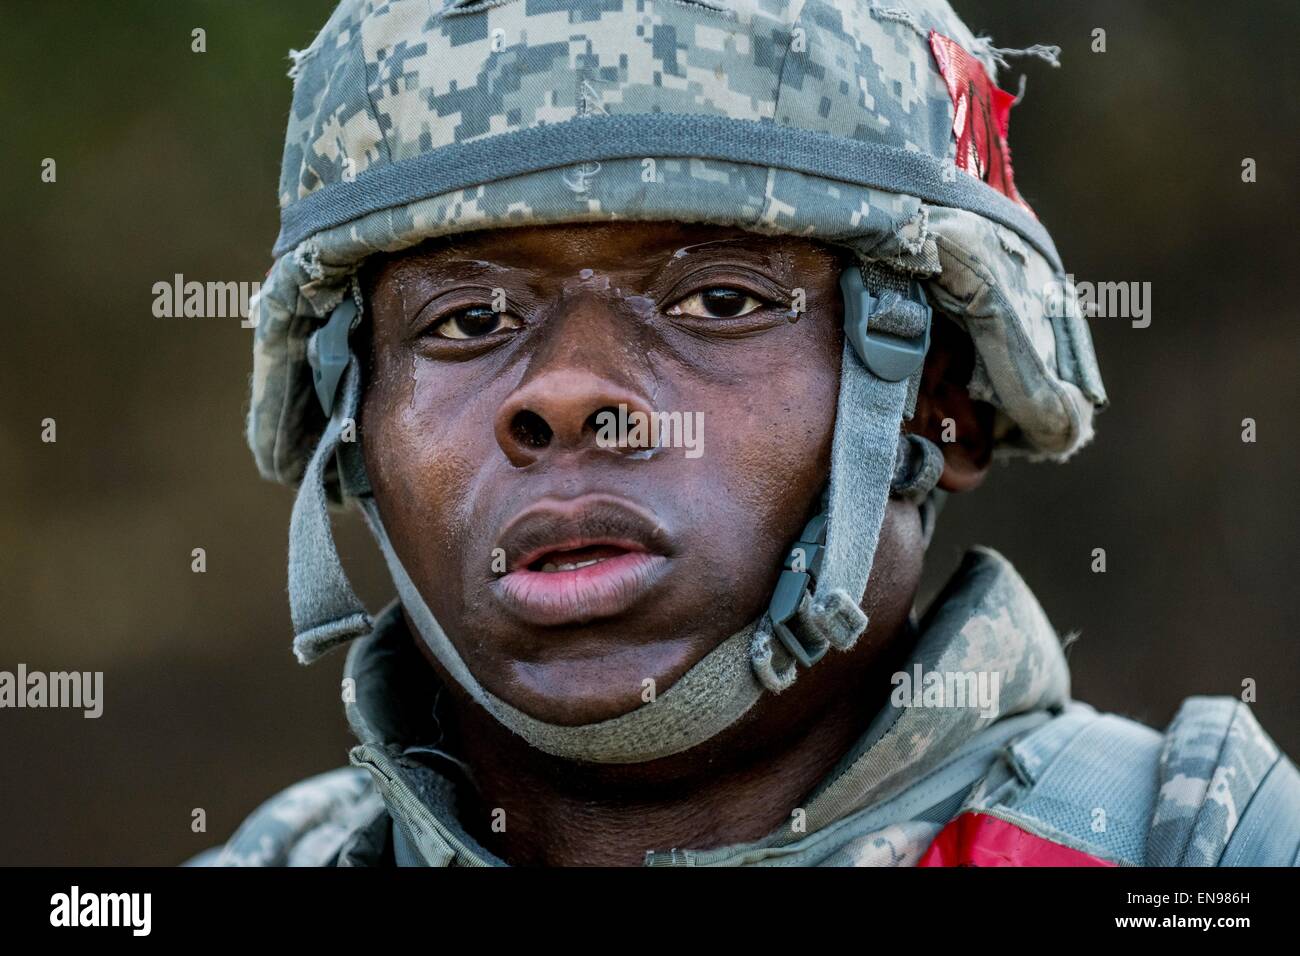 Spc. Sean Crooks with the 668th Engineer Company, poses for a portrait after completing a 4-mile ruck march carrying approximately 65 pounds worth of gear and equipment April 28, 2015 at Fort McCoy, Wisconsin. Stock Photo